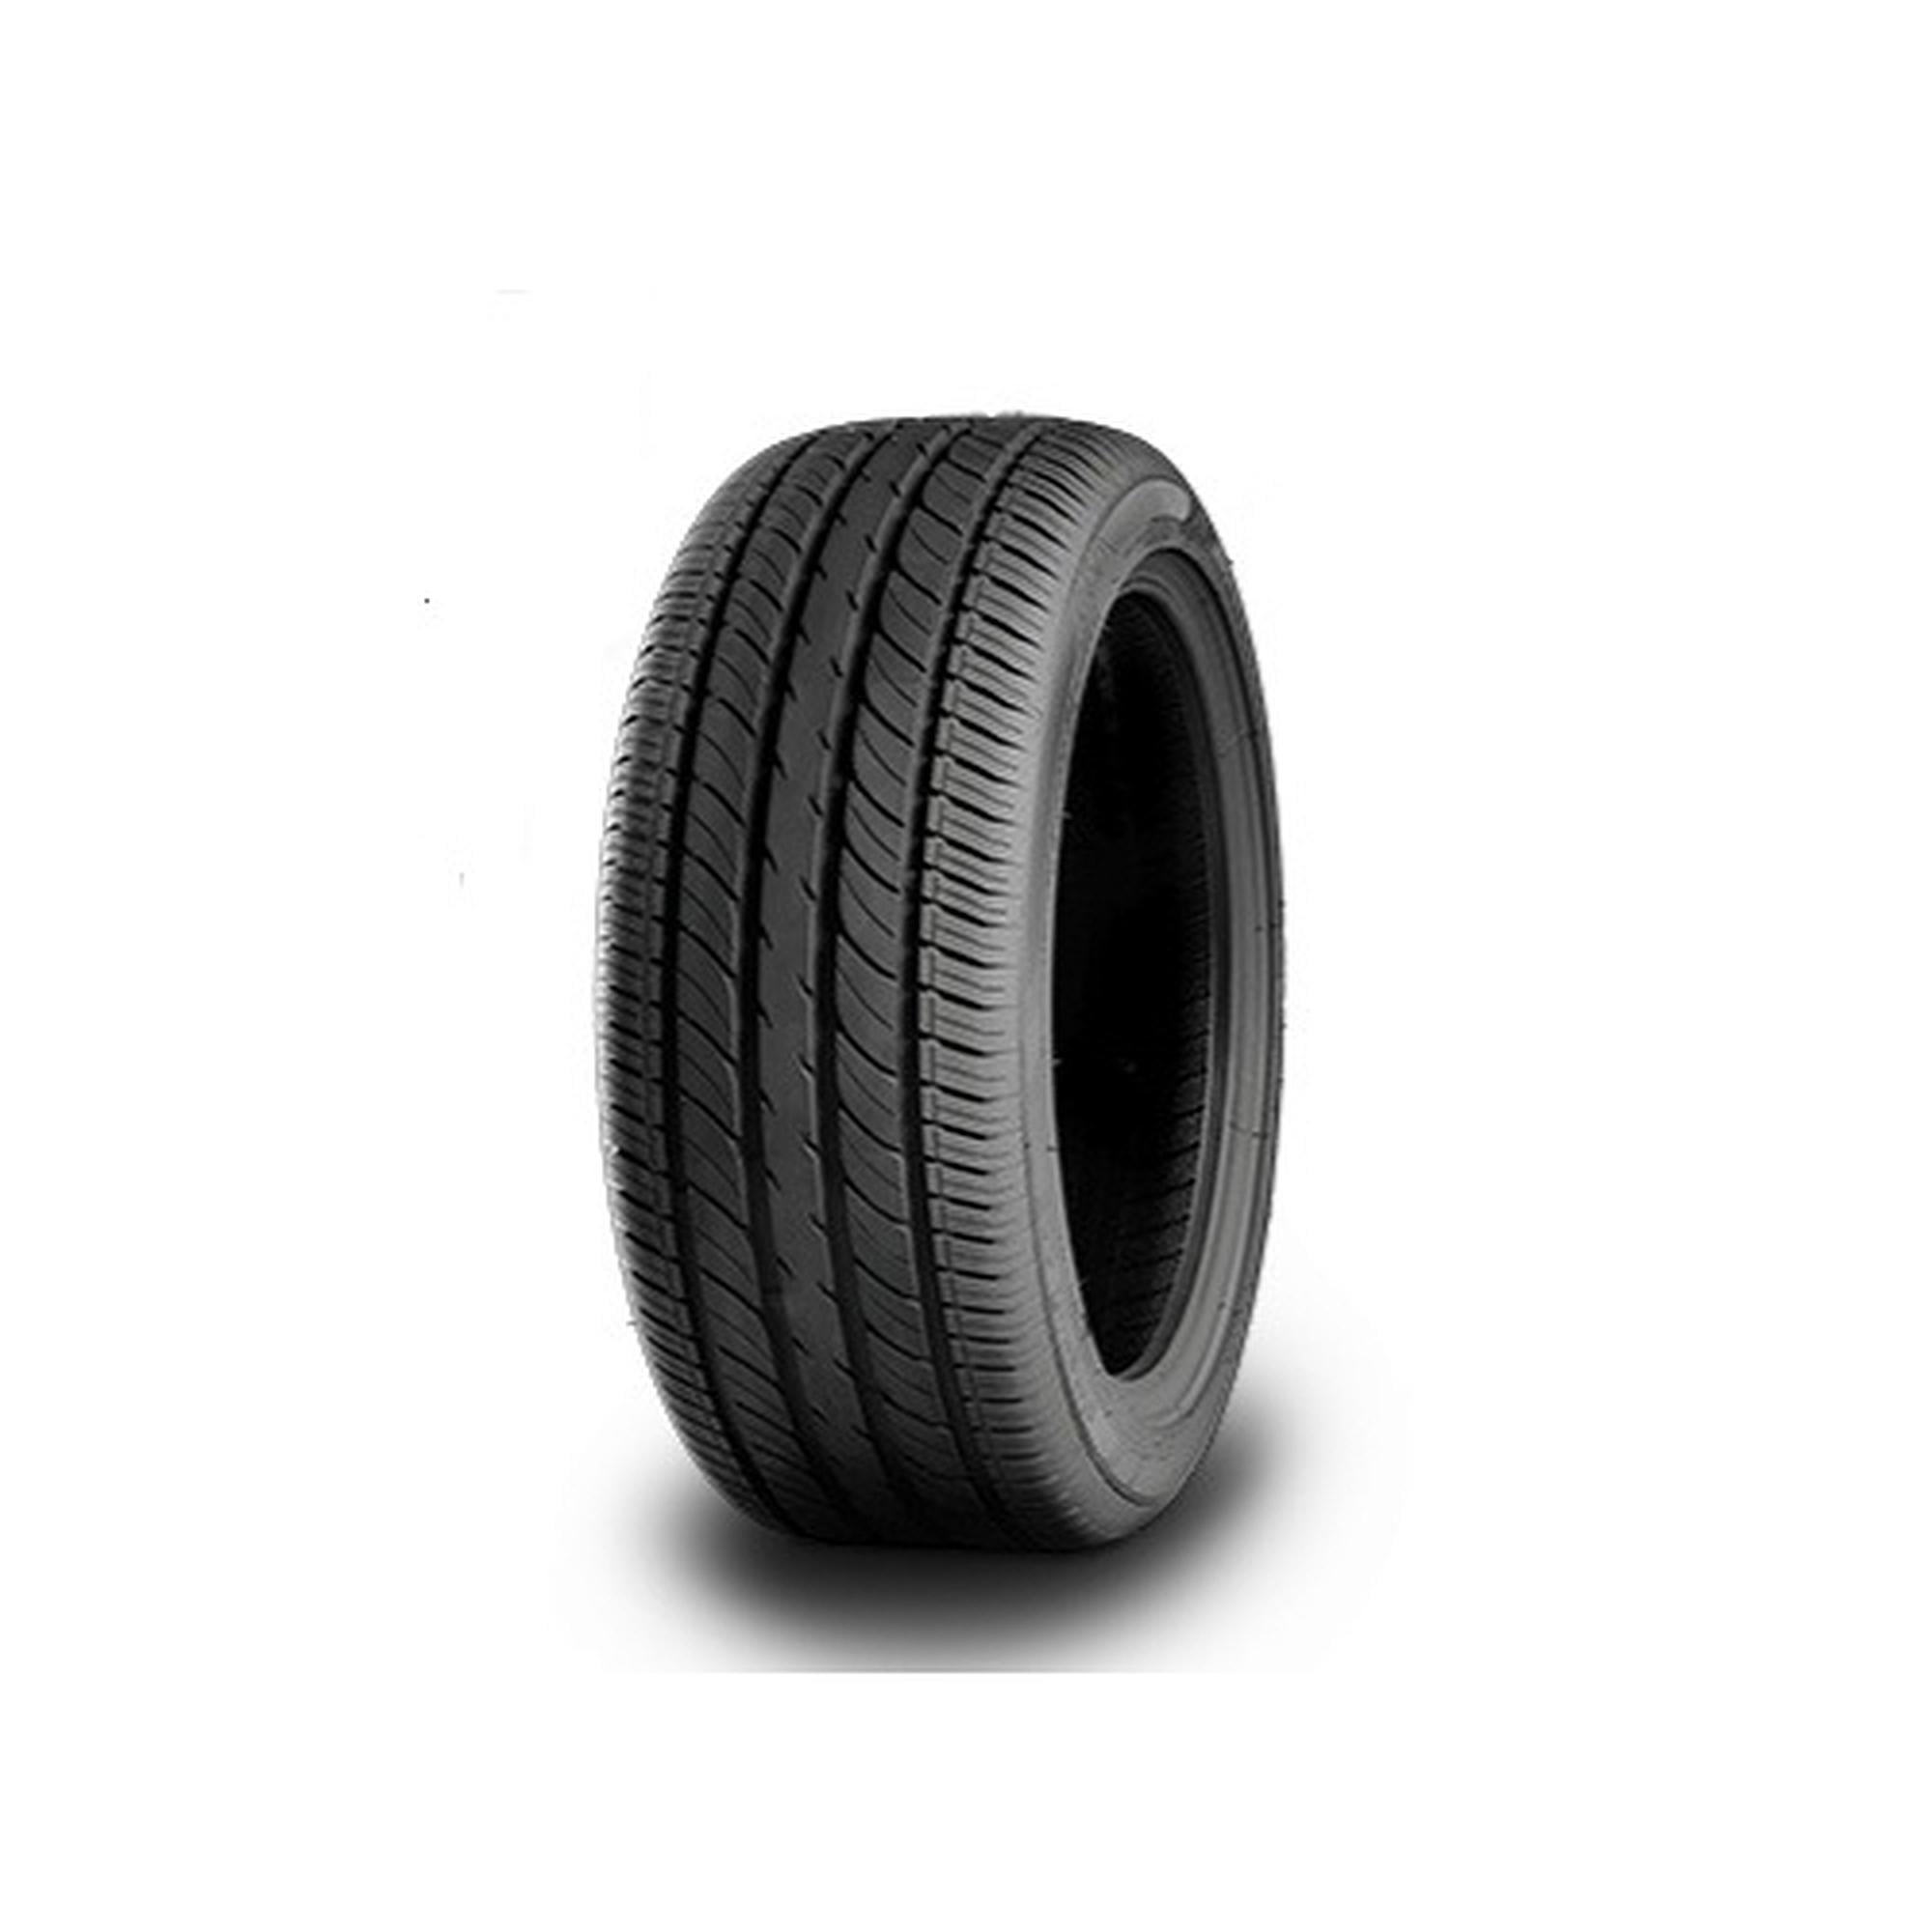 Eco 79T Waterfall 165/70R13 Passenger Dynamic Summer Tire